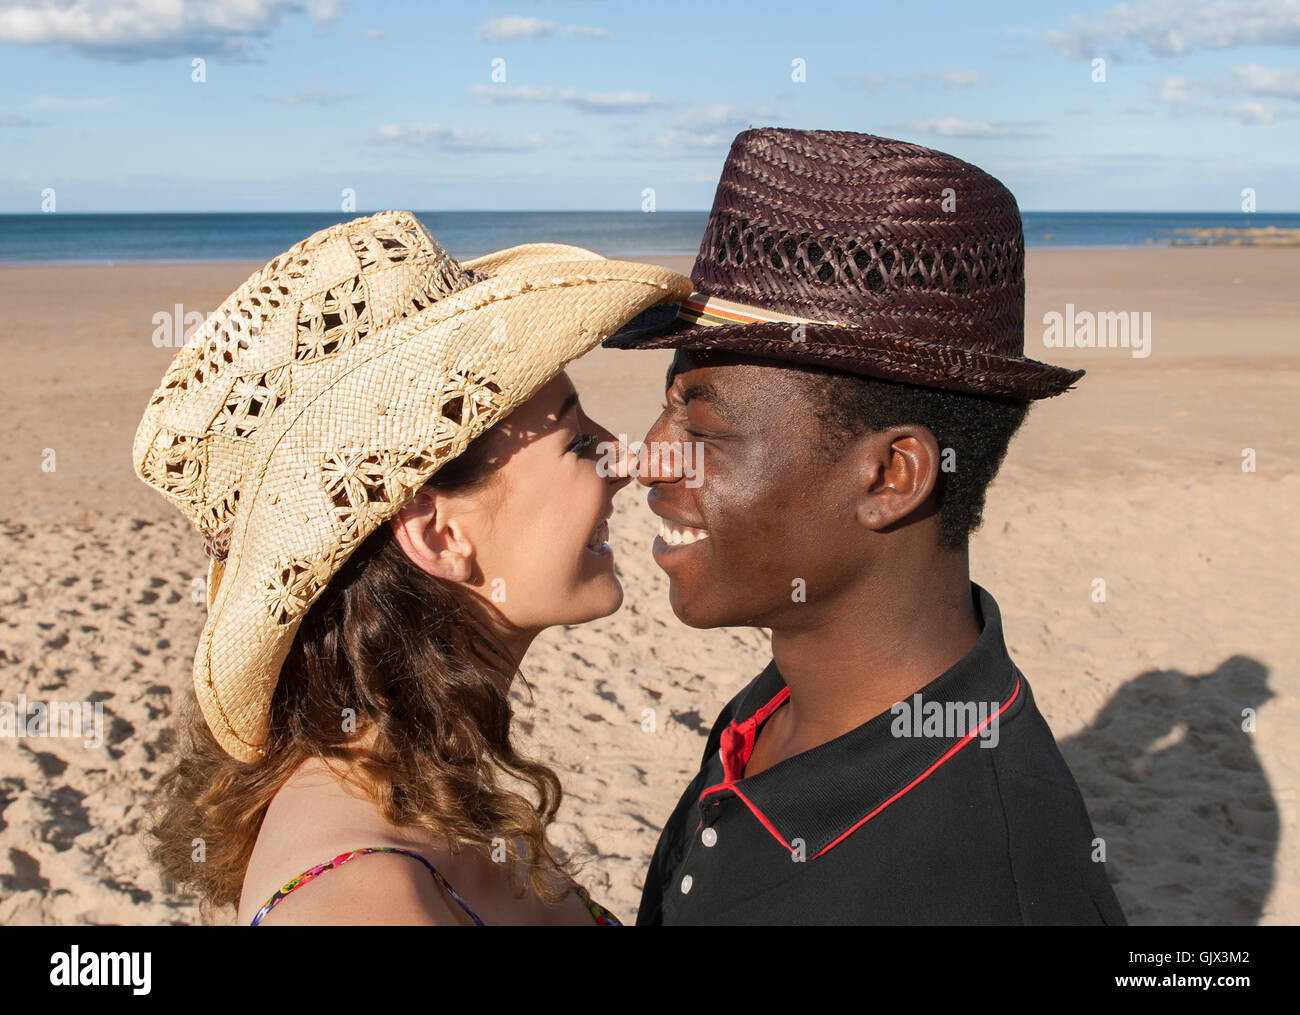 Attractive couple multicultural mixed race head shot on beach looking at each other laughing romantic emotions love hats Stock Photo